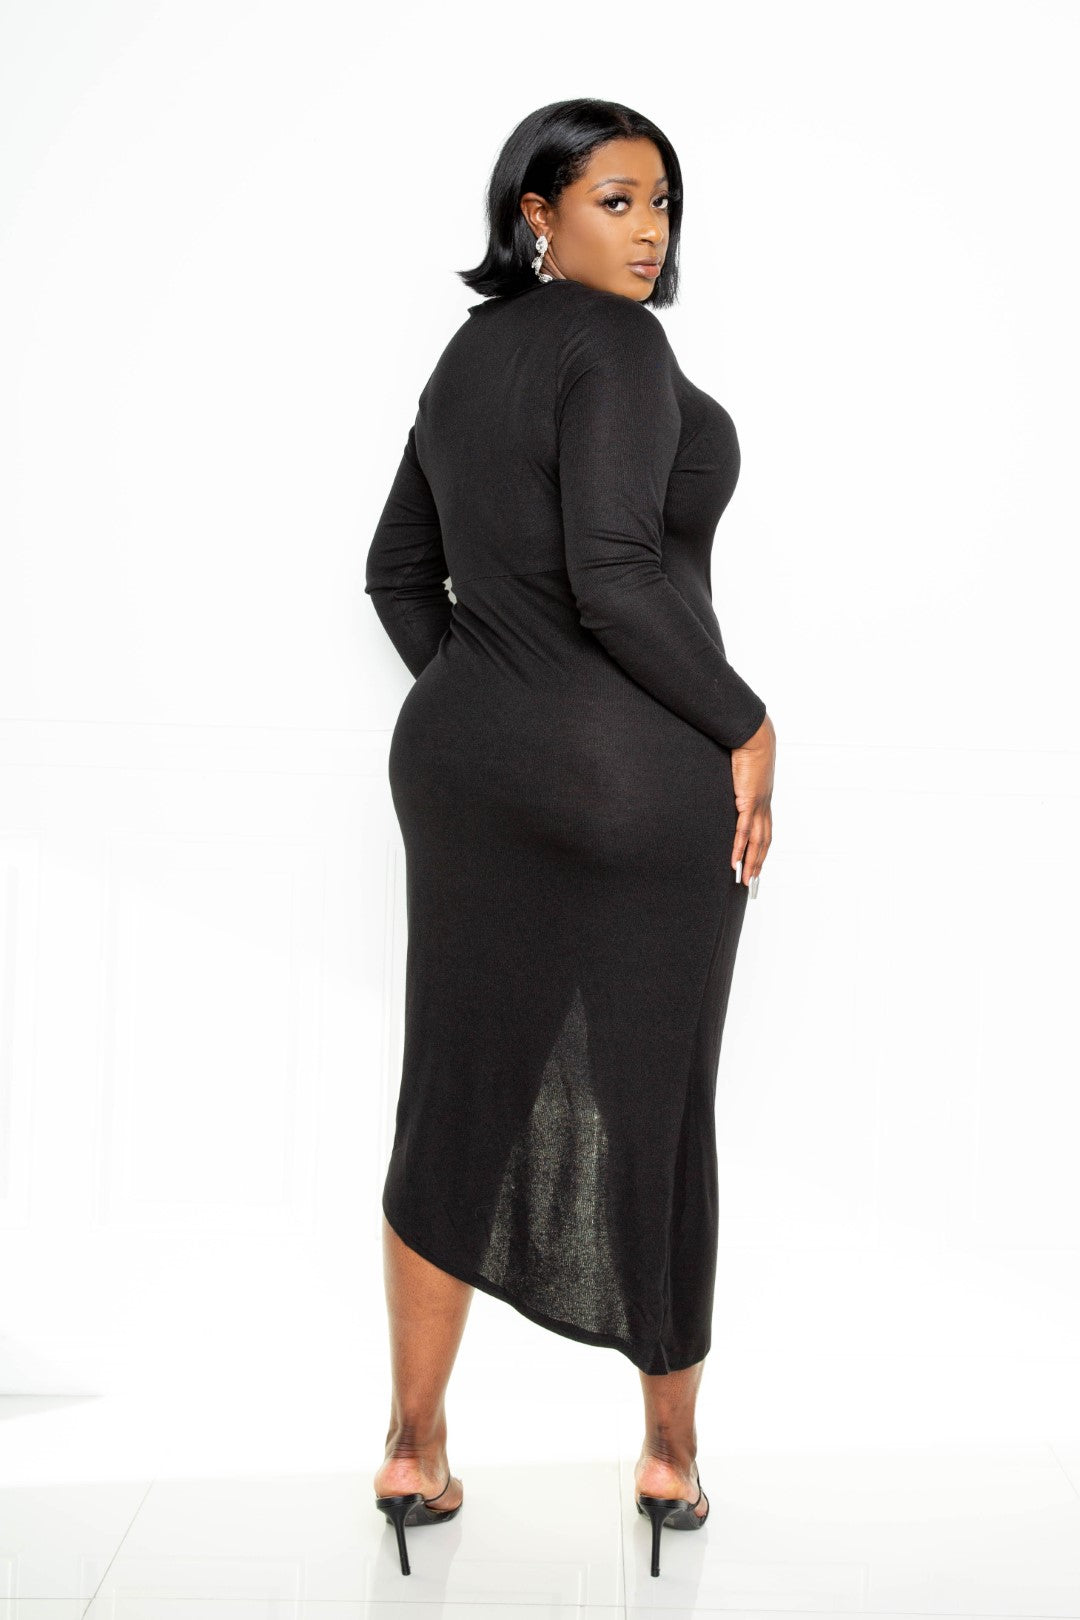 Asymmetrical Sweater Dress With Waterfall Ruffle | Black, Cream, PLUS SIZE, PLUS SIZE DRESSES, SALE, SALE PLUS SIZE | Style Your Curves